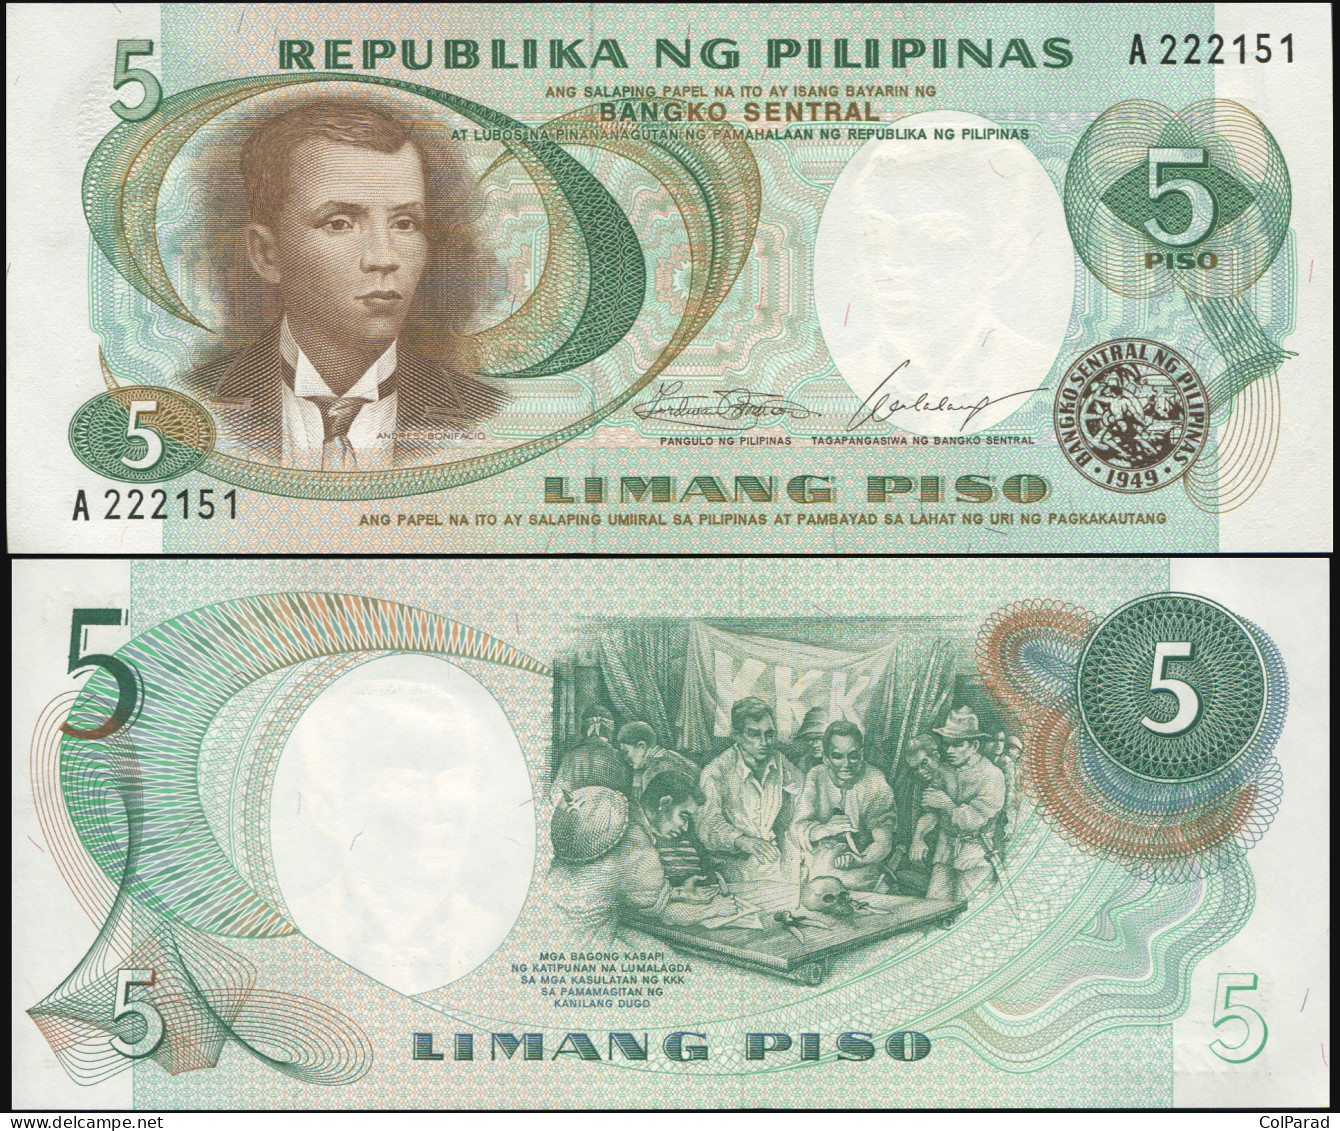 PHILIPPINES 5 PISO - ND (1969) - Paper Unc - P.143a Banknote - Filipinas